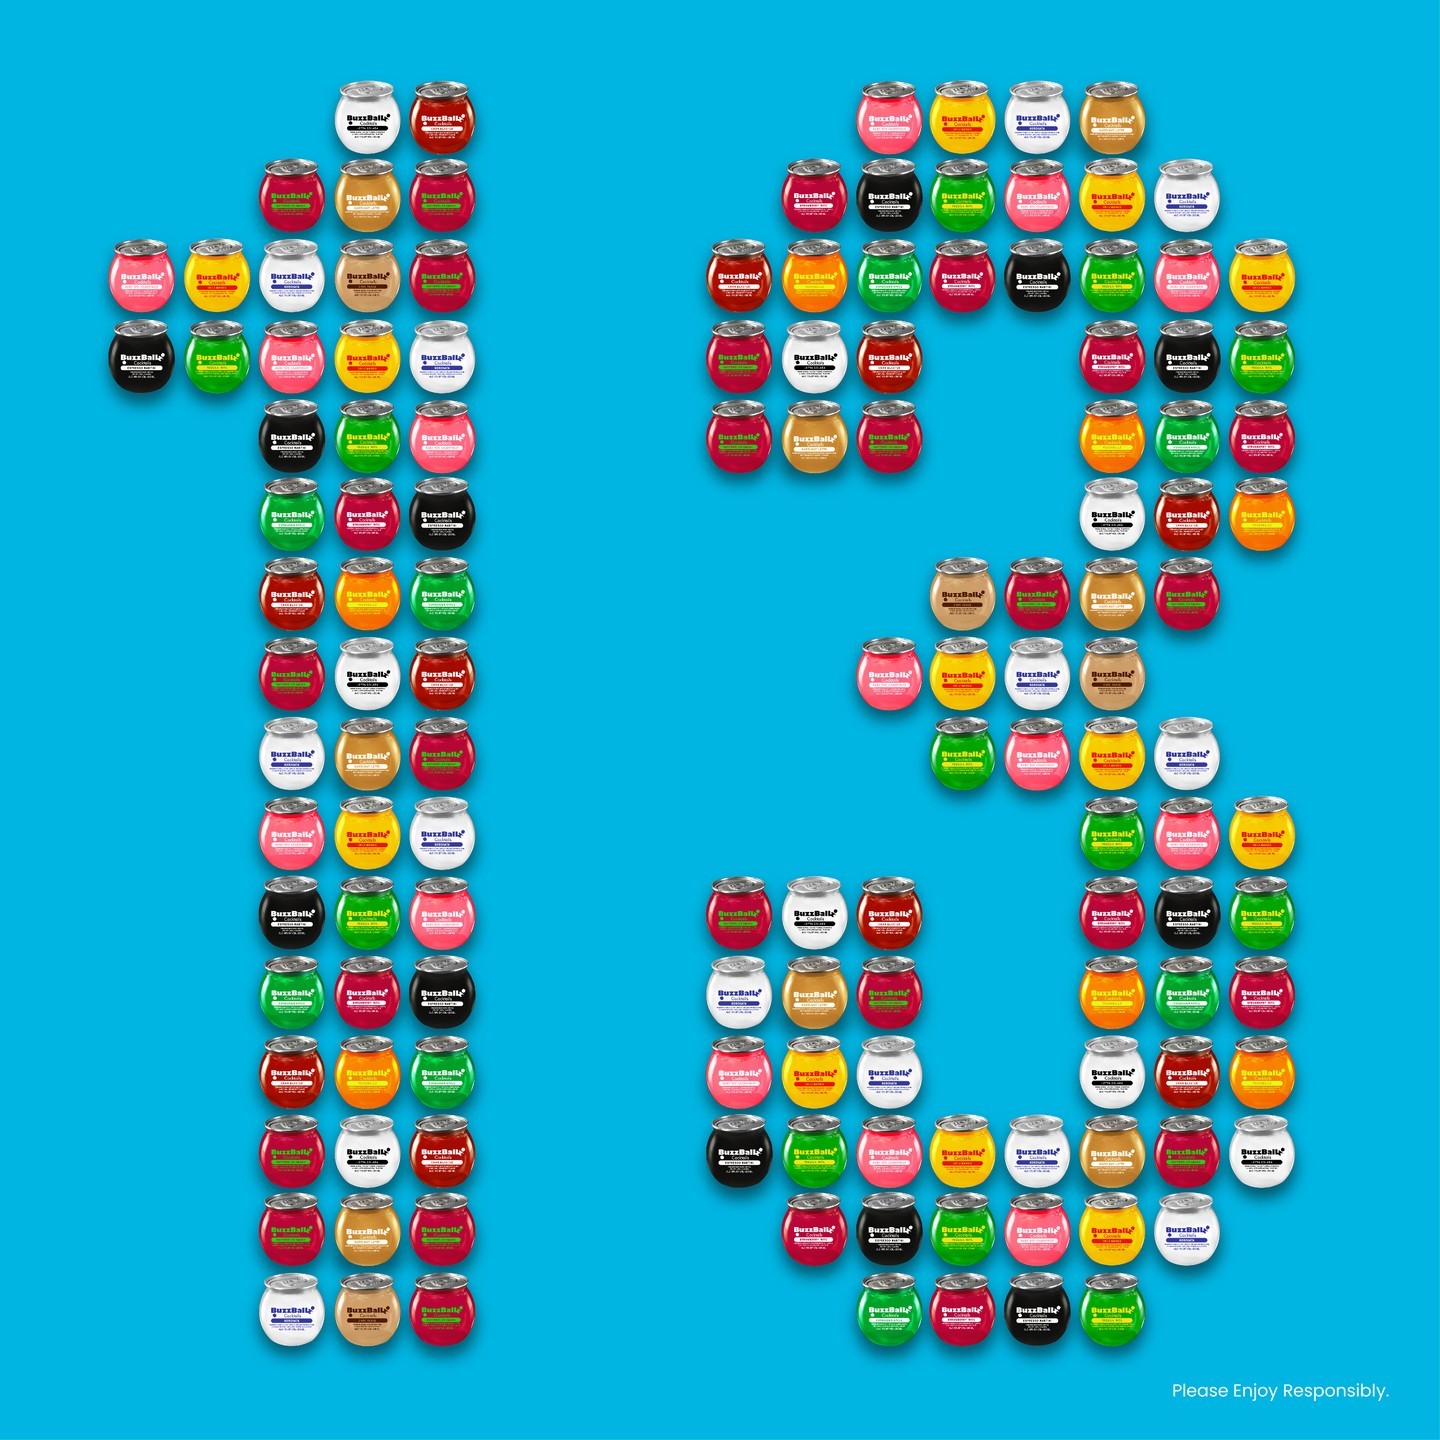 Today’s our lucky thirteenth birthday!!! Thankfully we have 13 flavors to properly celebrate.